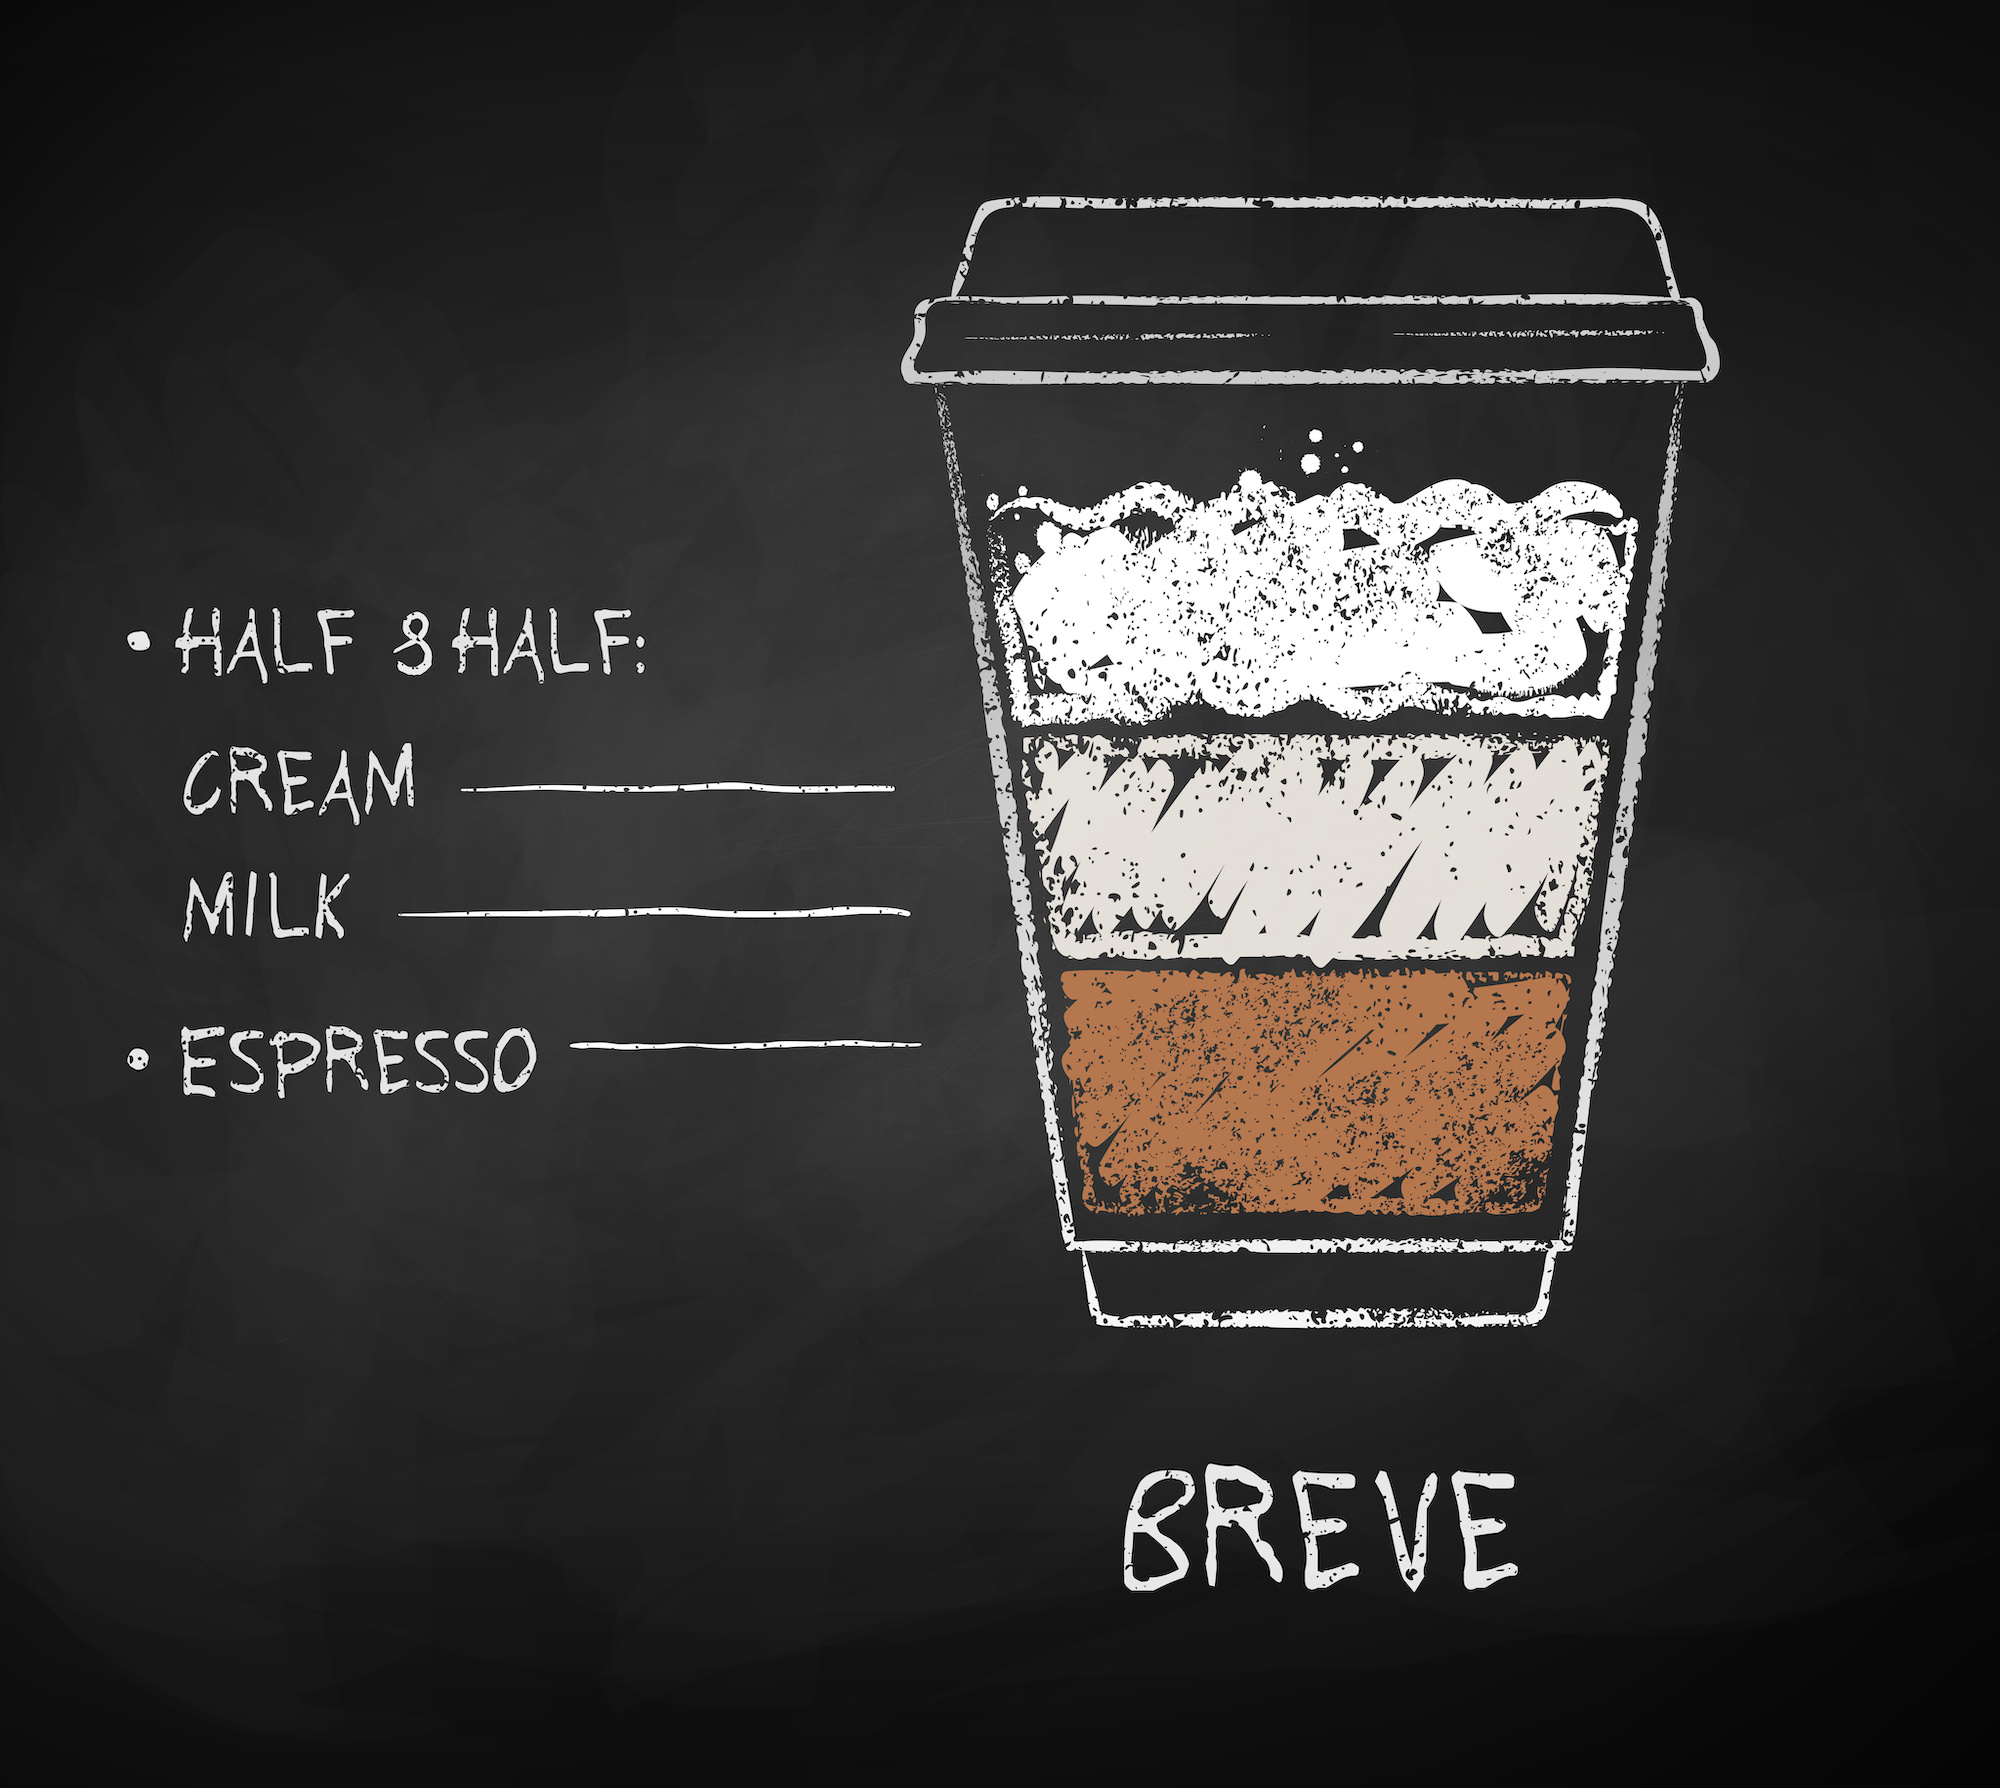 What Is A Breve Coffee Drink?